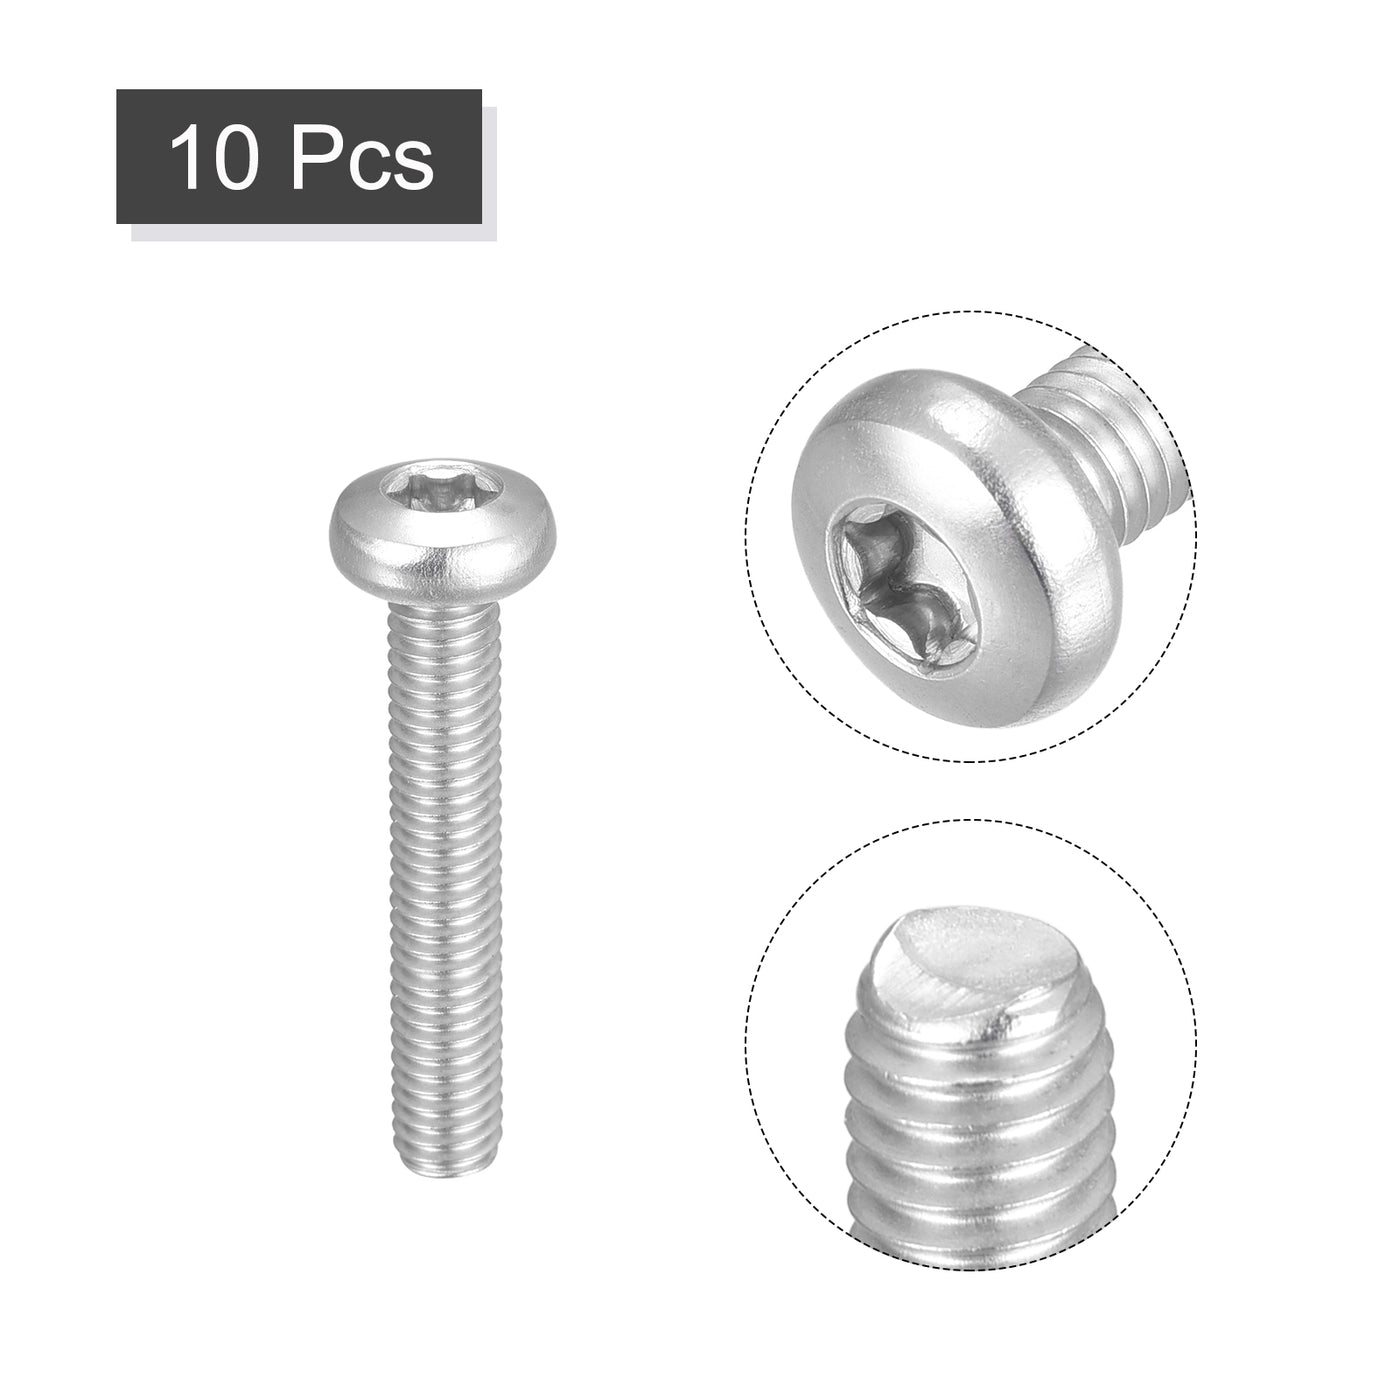 uxcell Uxcell M6x35mm Torx Security Machine Screws, 10pcs 316 Stainless Steel Pan Head Screw